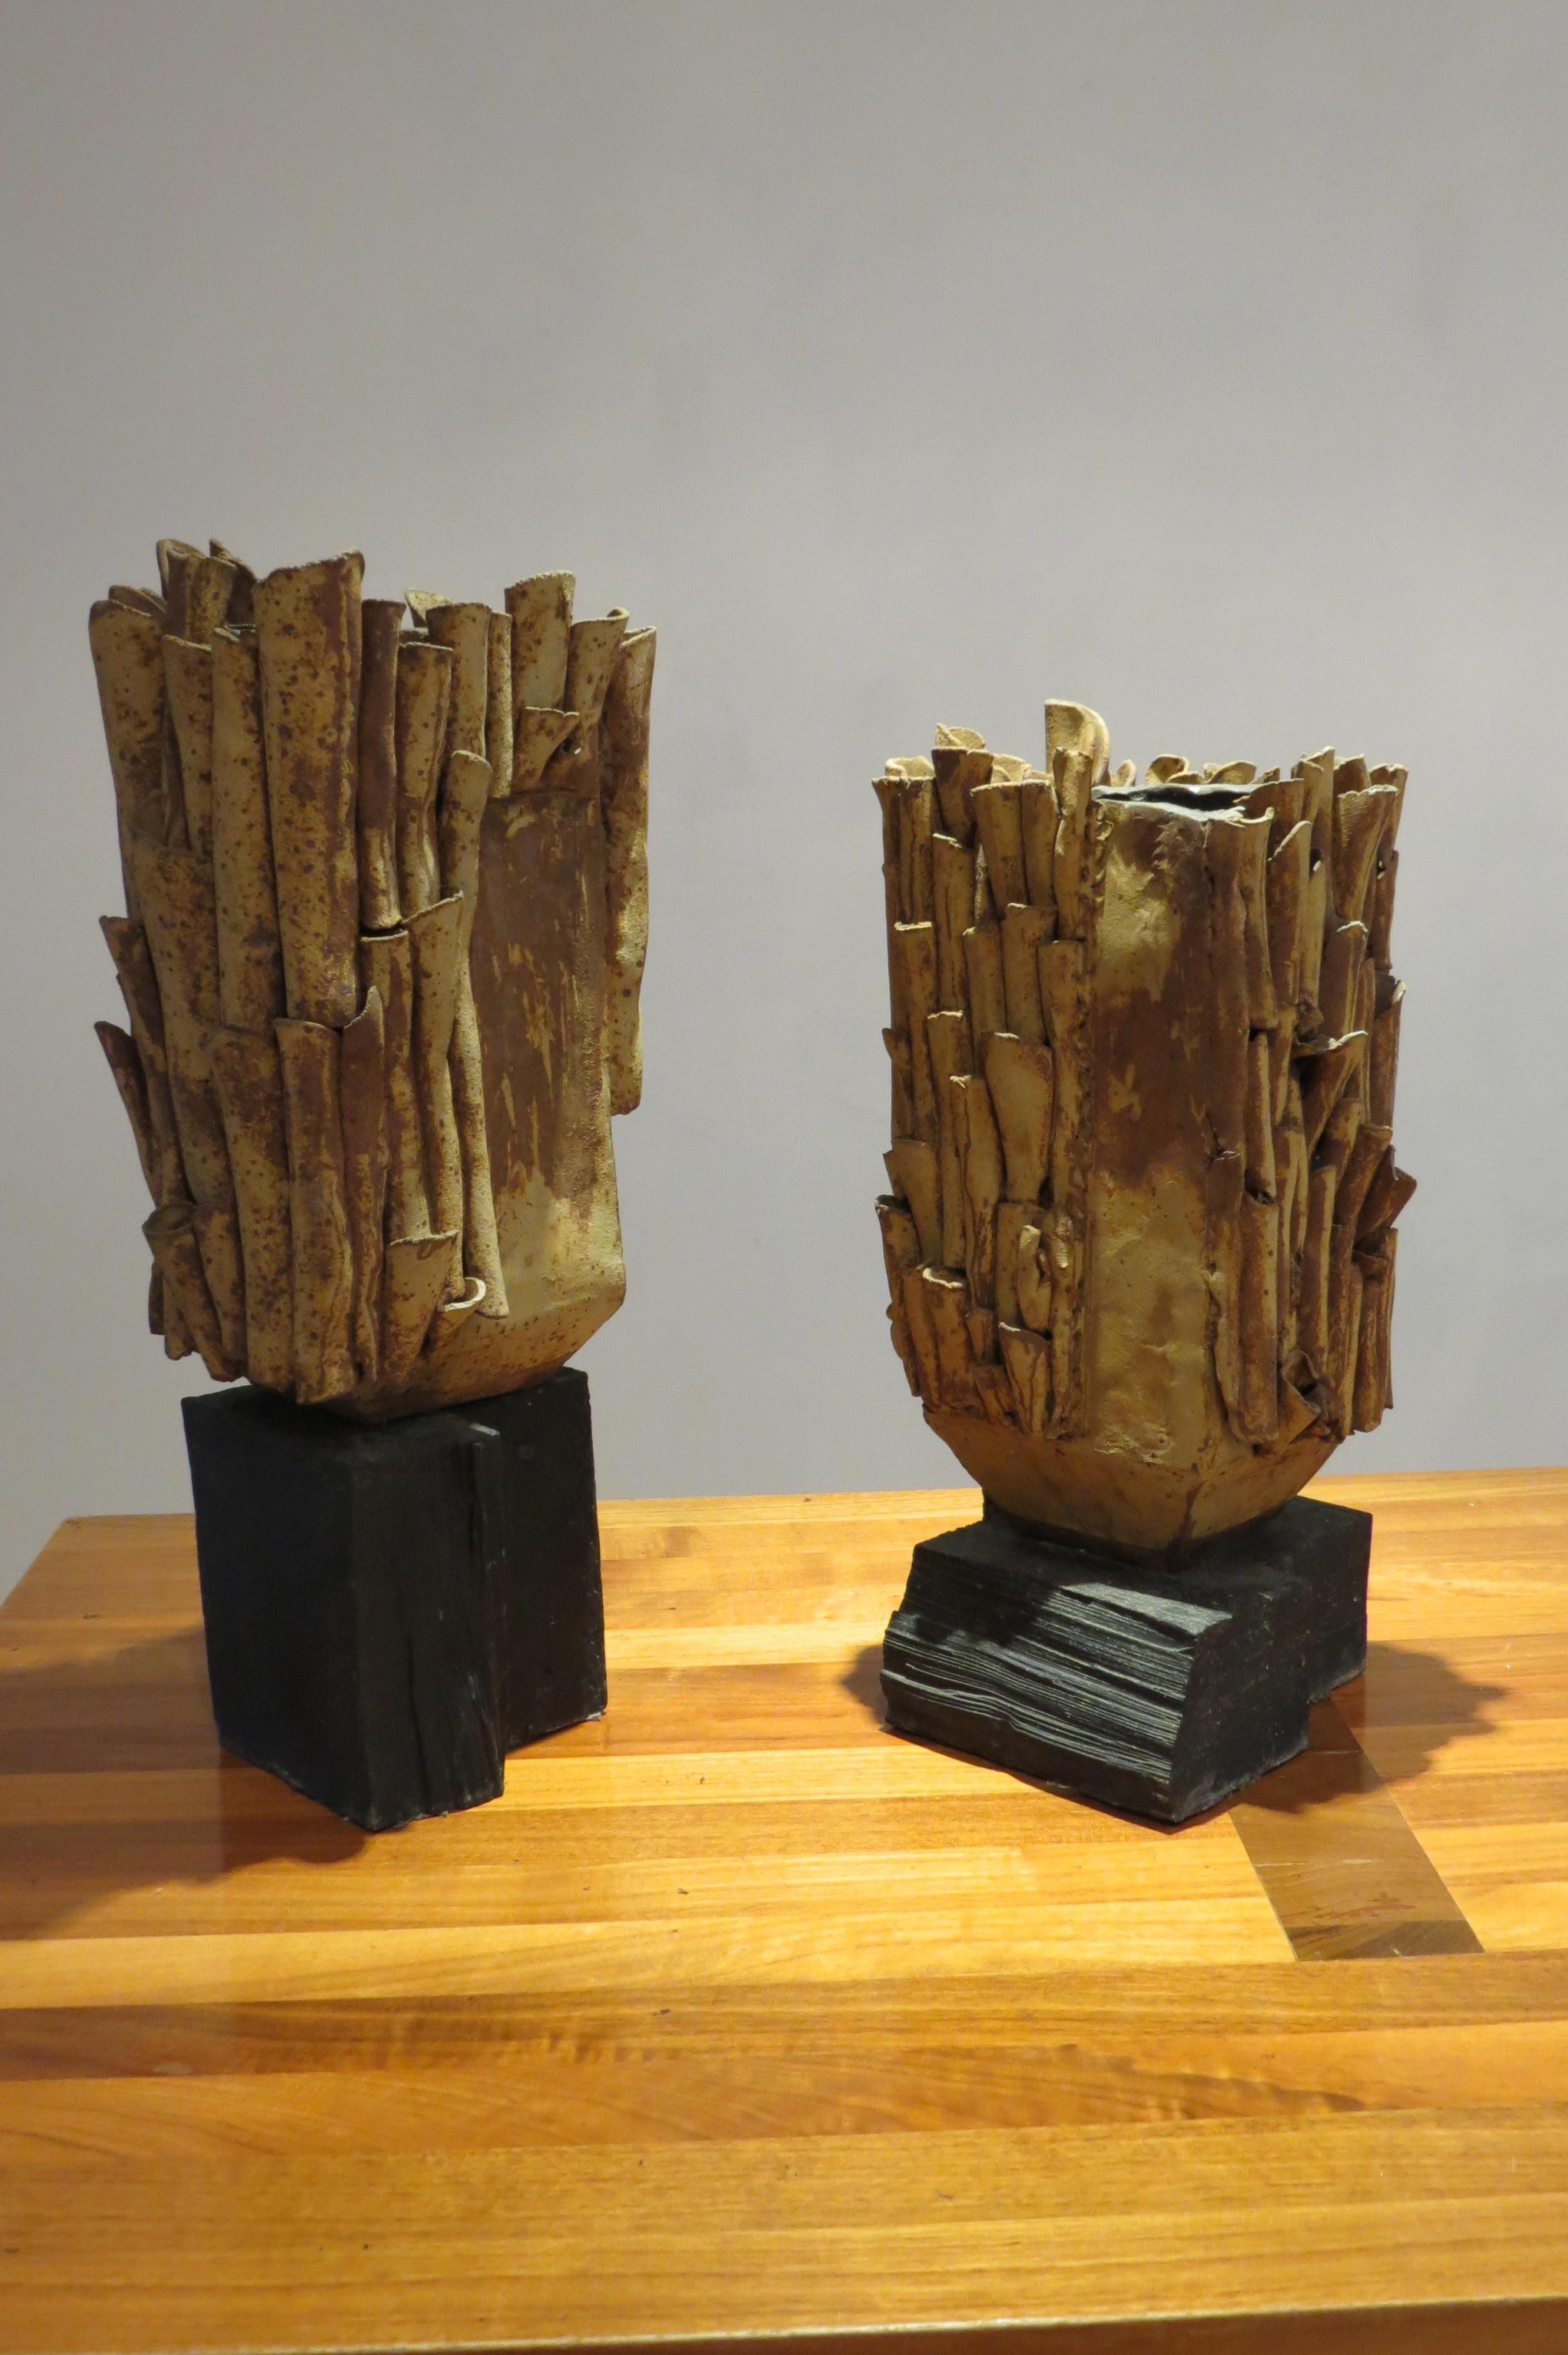 Pair of large Studio Pottery stoneware sculpture vases by Sylvia Morris
A pair of large Studio Pottery stoneware vases by Sylvia Morris. These date from the 1970s. Hand produced organic form vases mounted on ebonized wooden bases. Wonderfully